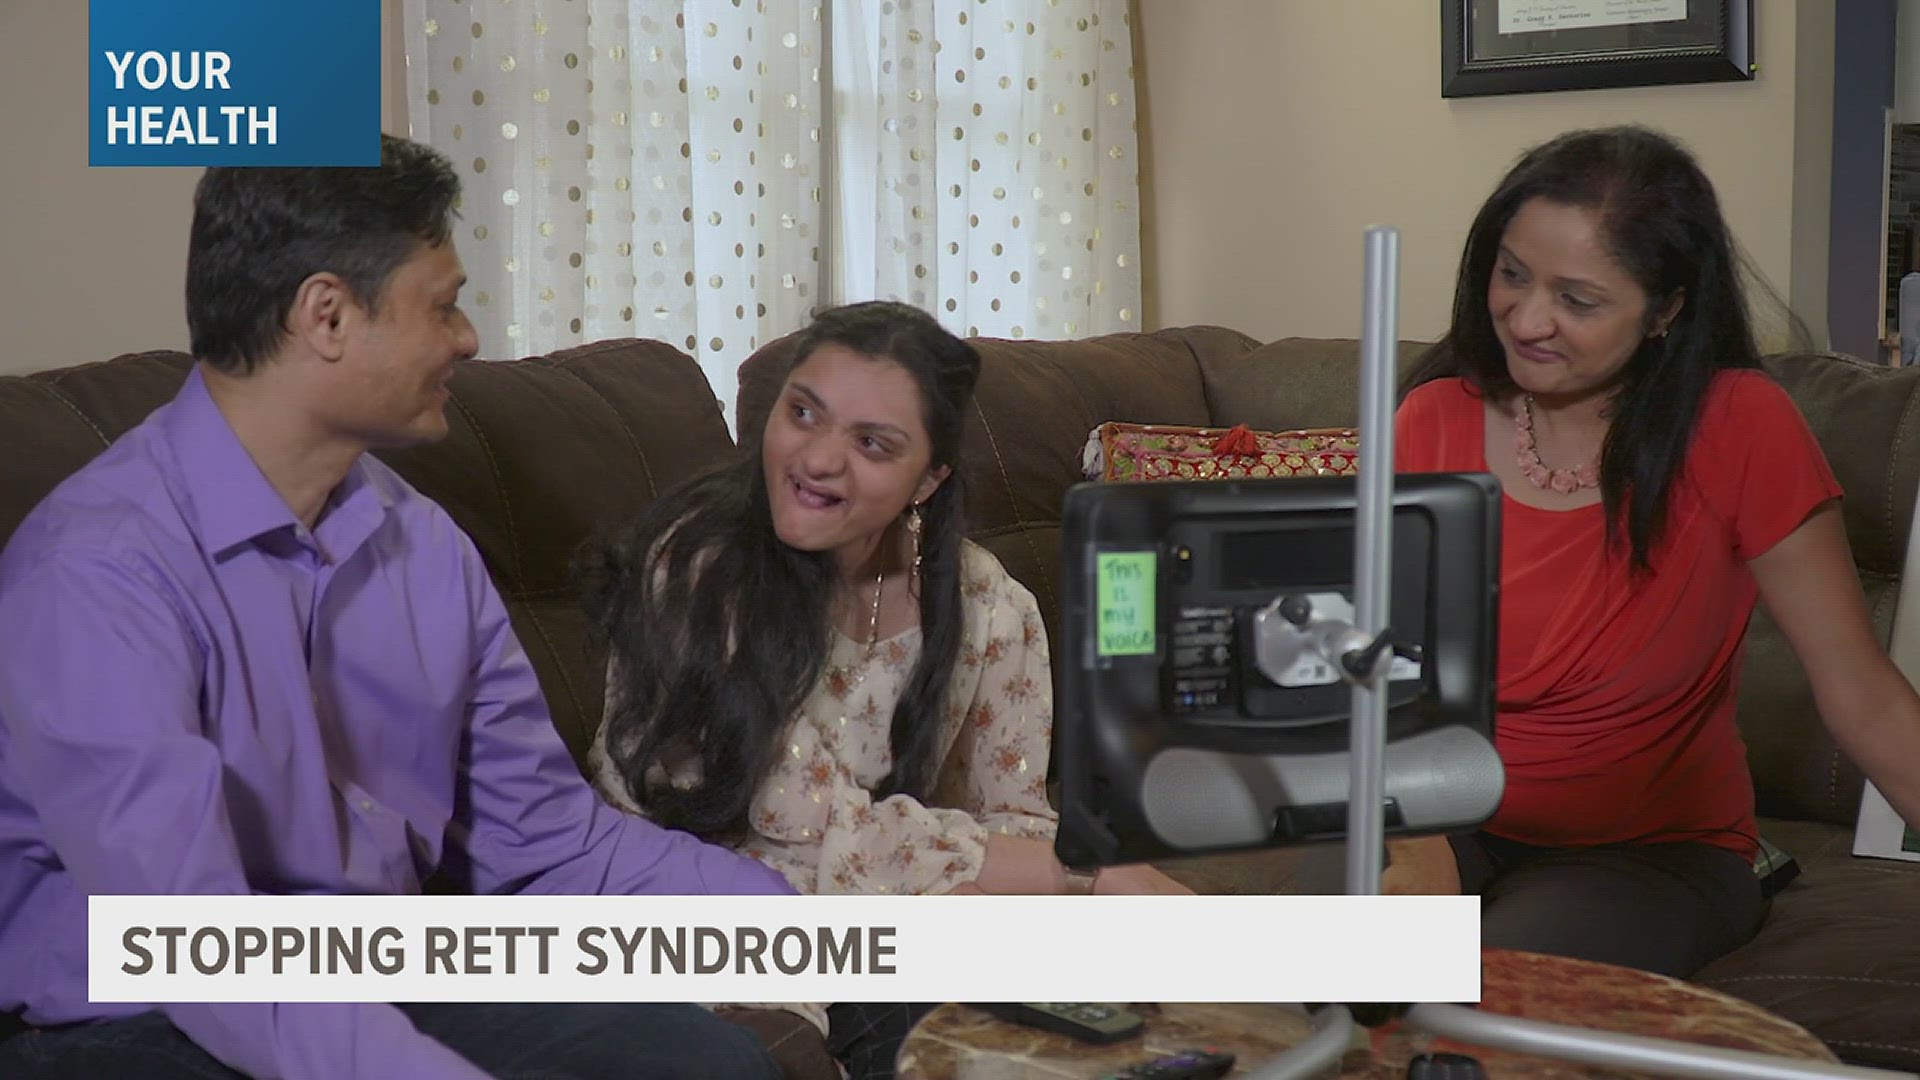 Rett Syndrome is a condition affecting everyday motor functions in hands and arms, and has no cure. Scientists are now developing a drug to slow the symptoms.